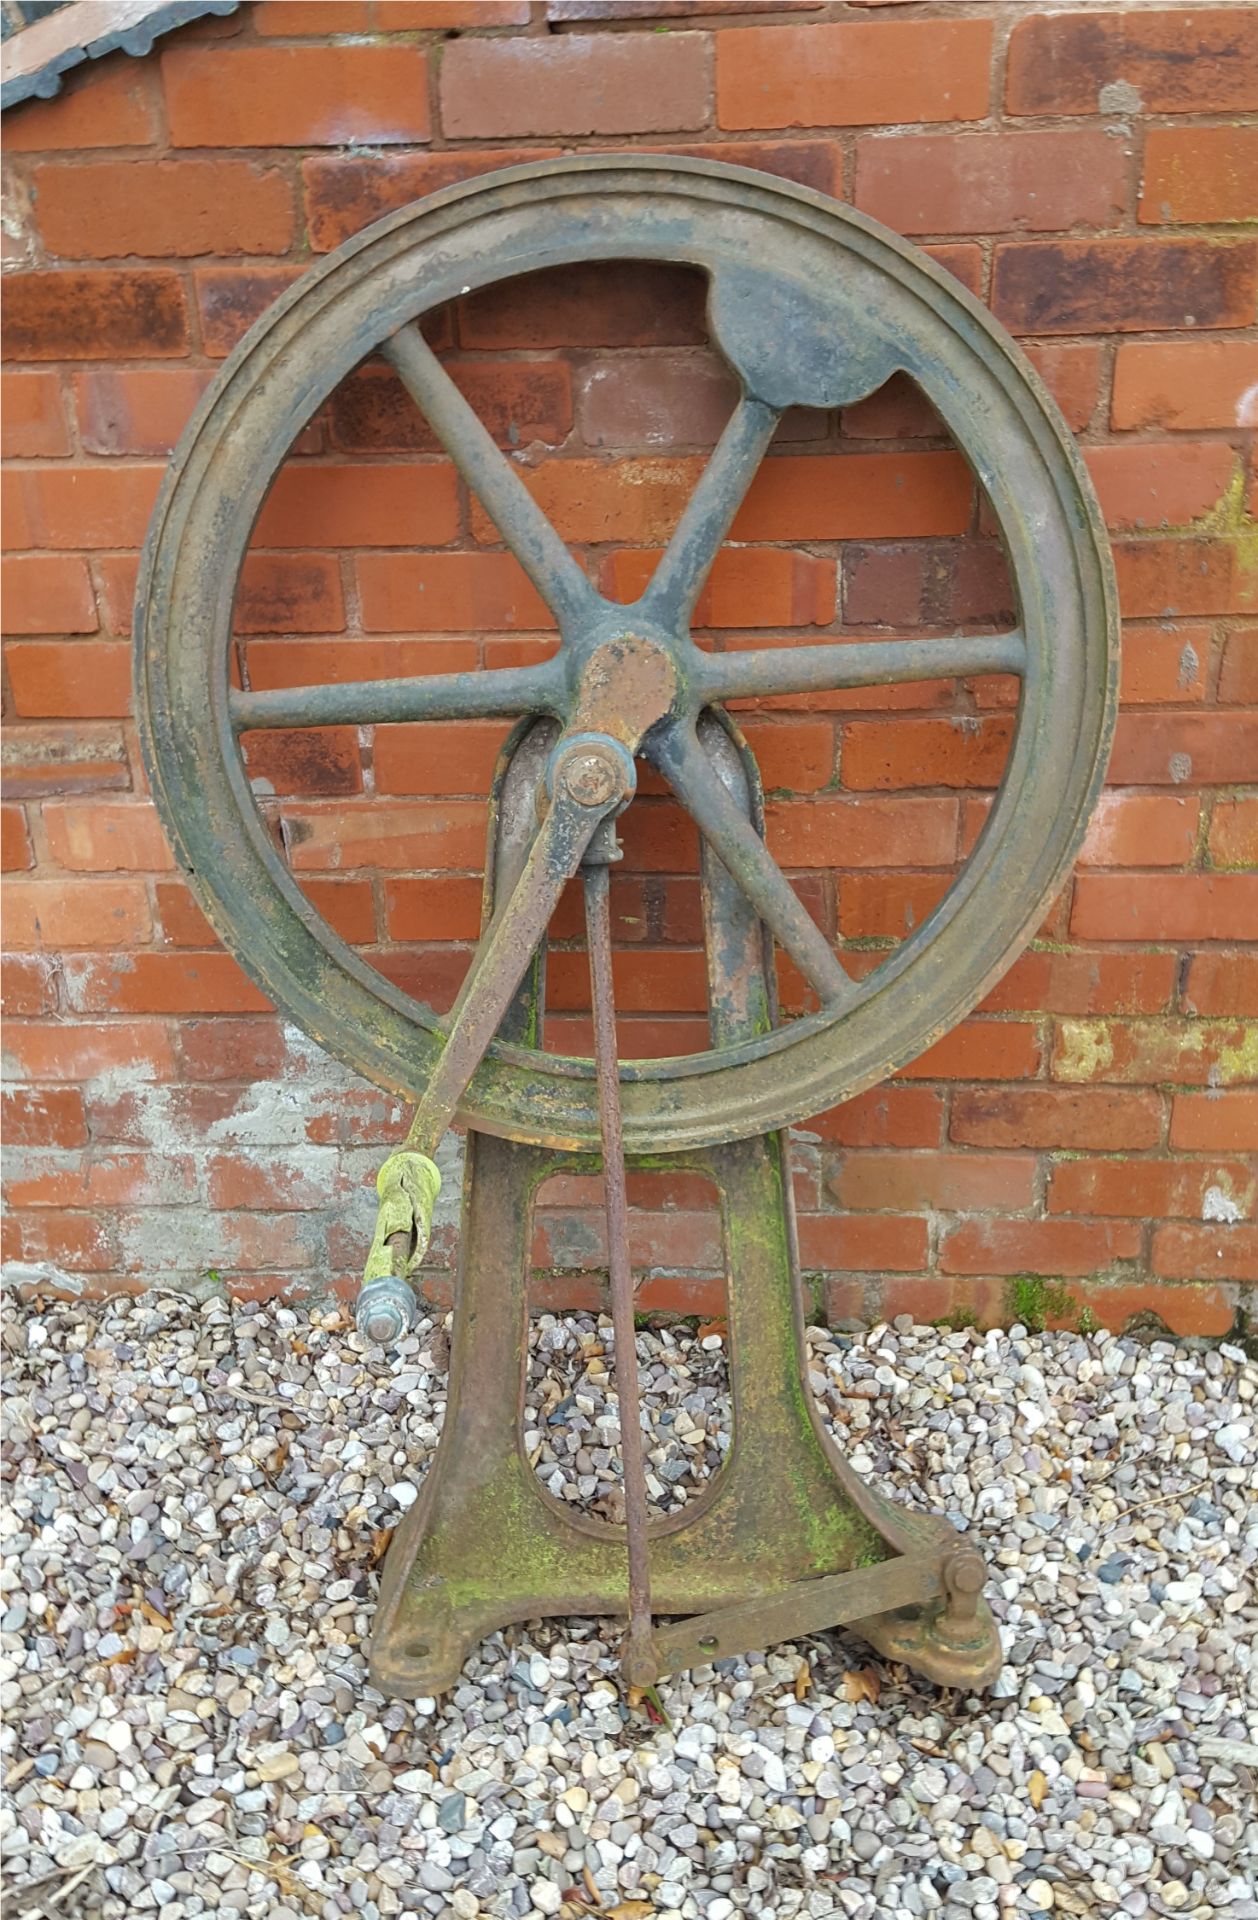 Antique Vintage Cast Iron Pump Wheel Possibly Railway Related